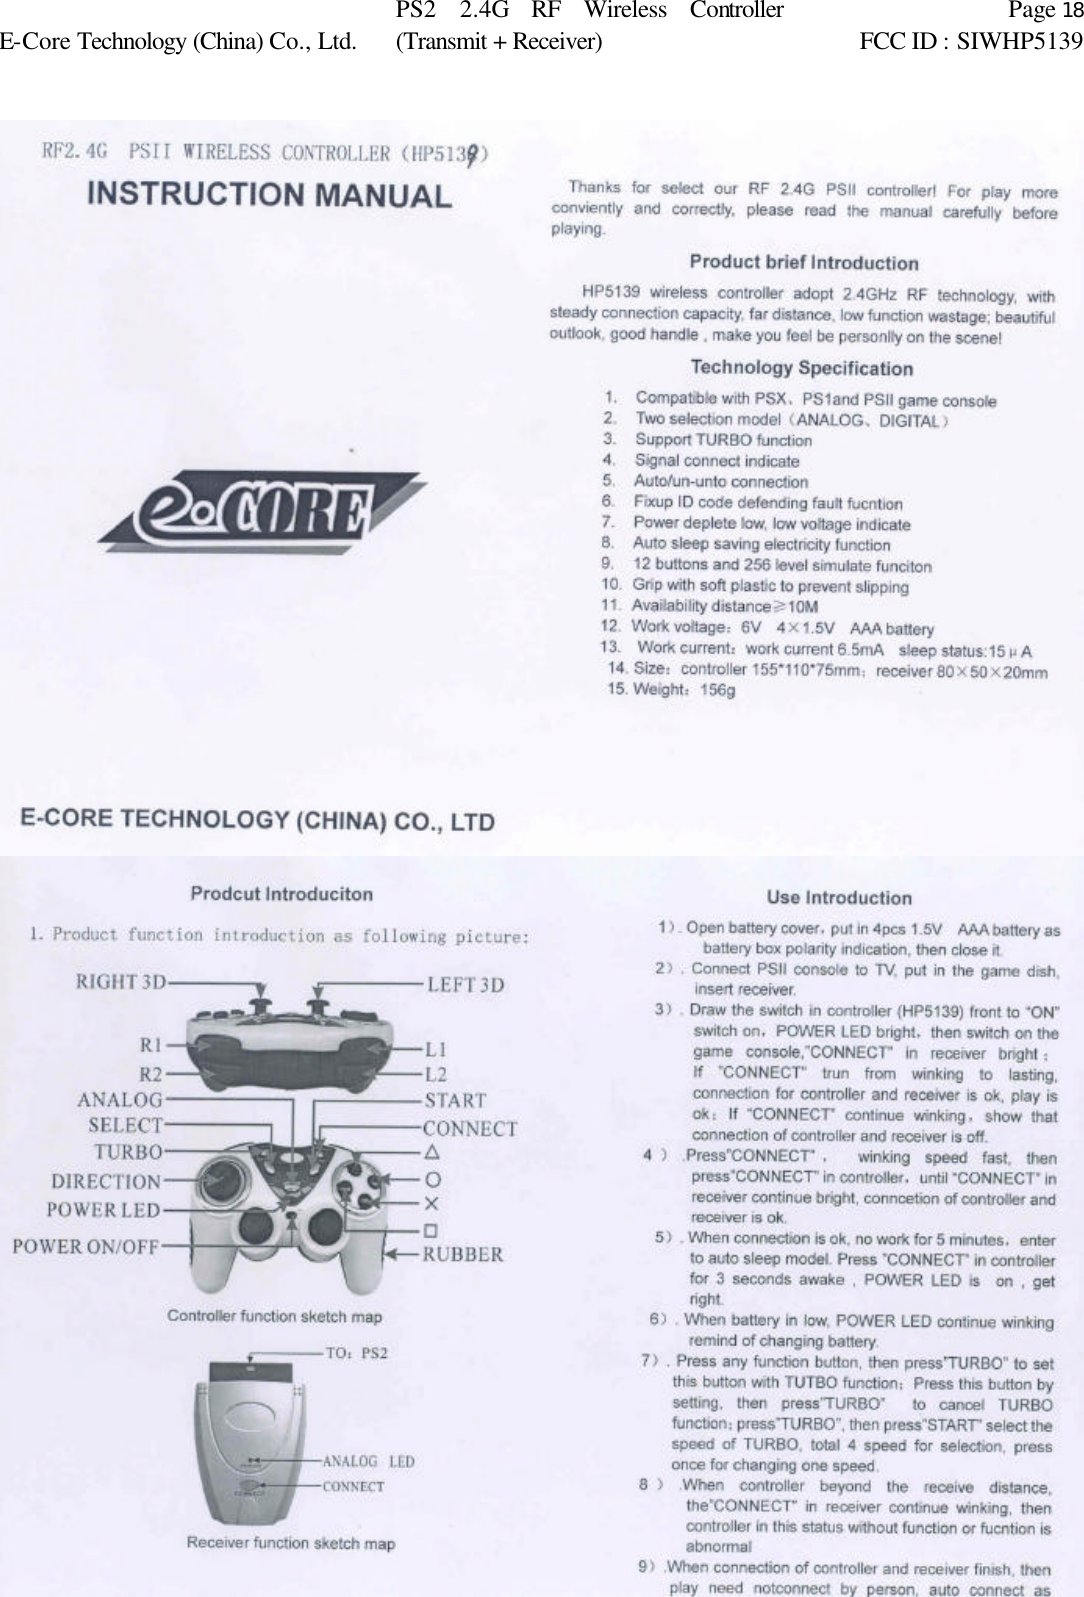  Page 18 E-Core Technology (China) Co., Ltd. PS2 2.4G RF Wireless Controller (Transmit + Receiver) FCC ID : SIWHP5139      